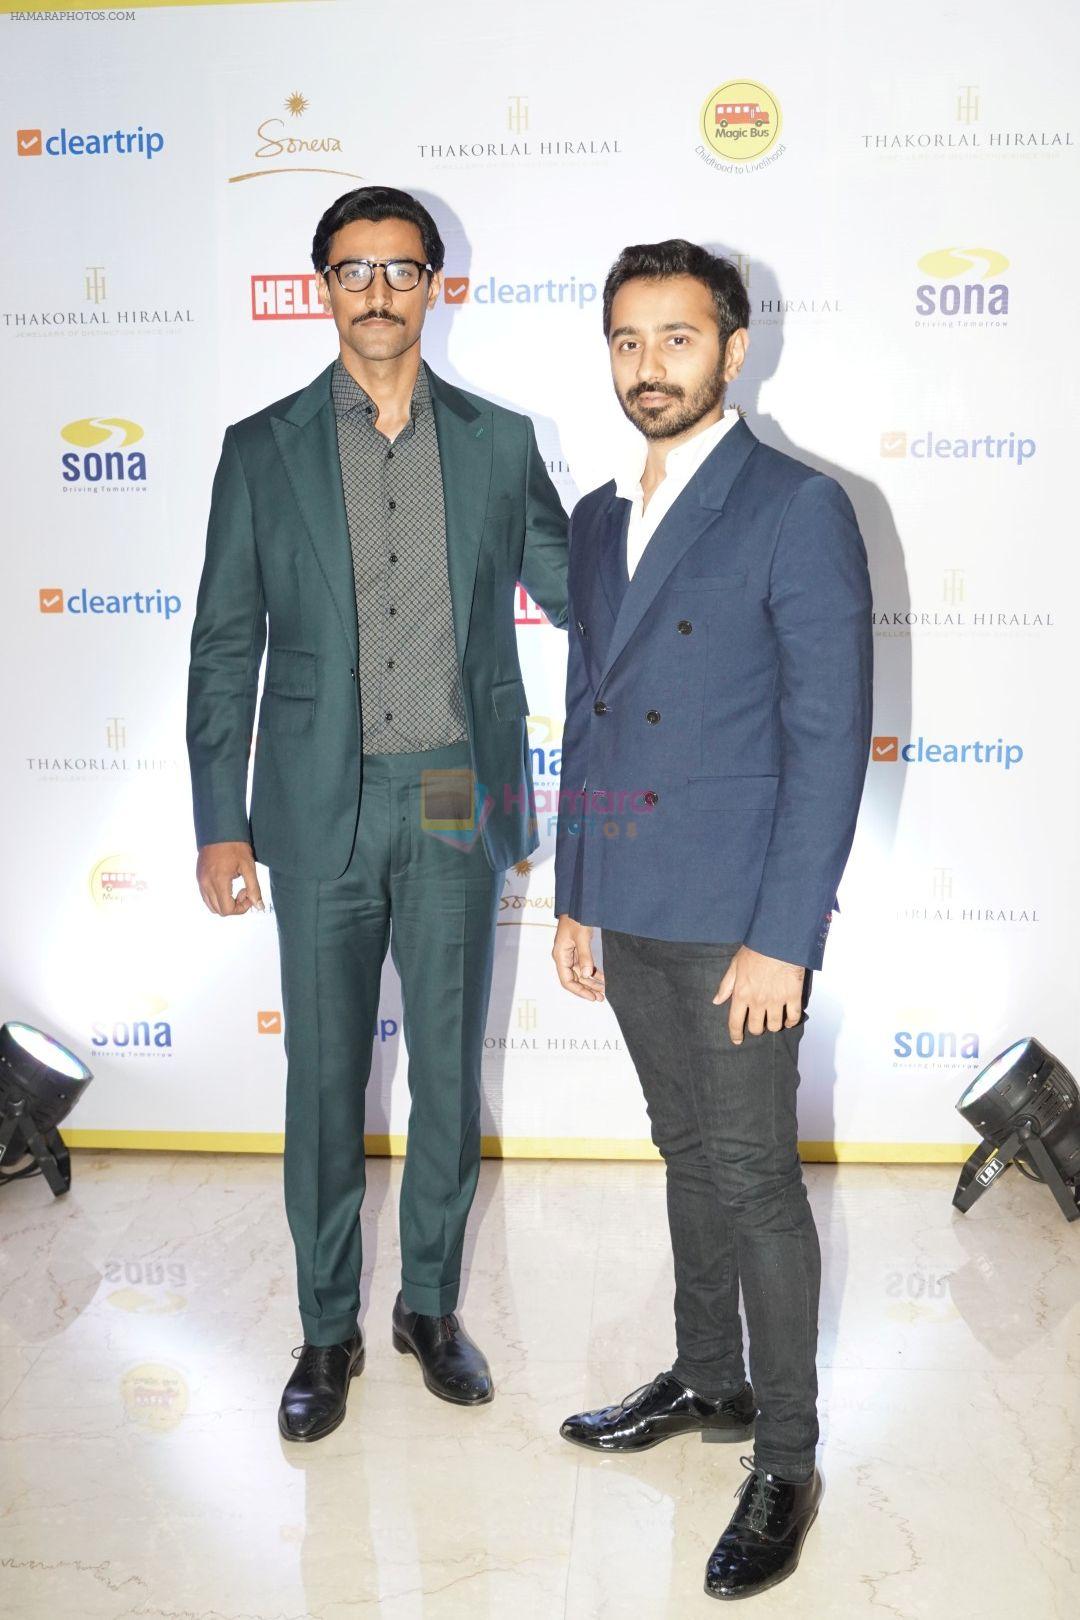 Kunal Kapoor at the Red Carpet Of 2017 Magic Bus Benefit Gala on 7th Oct 2017